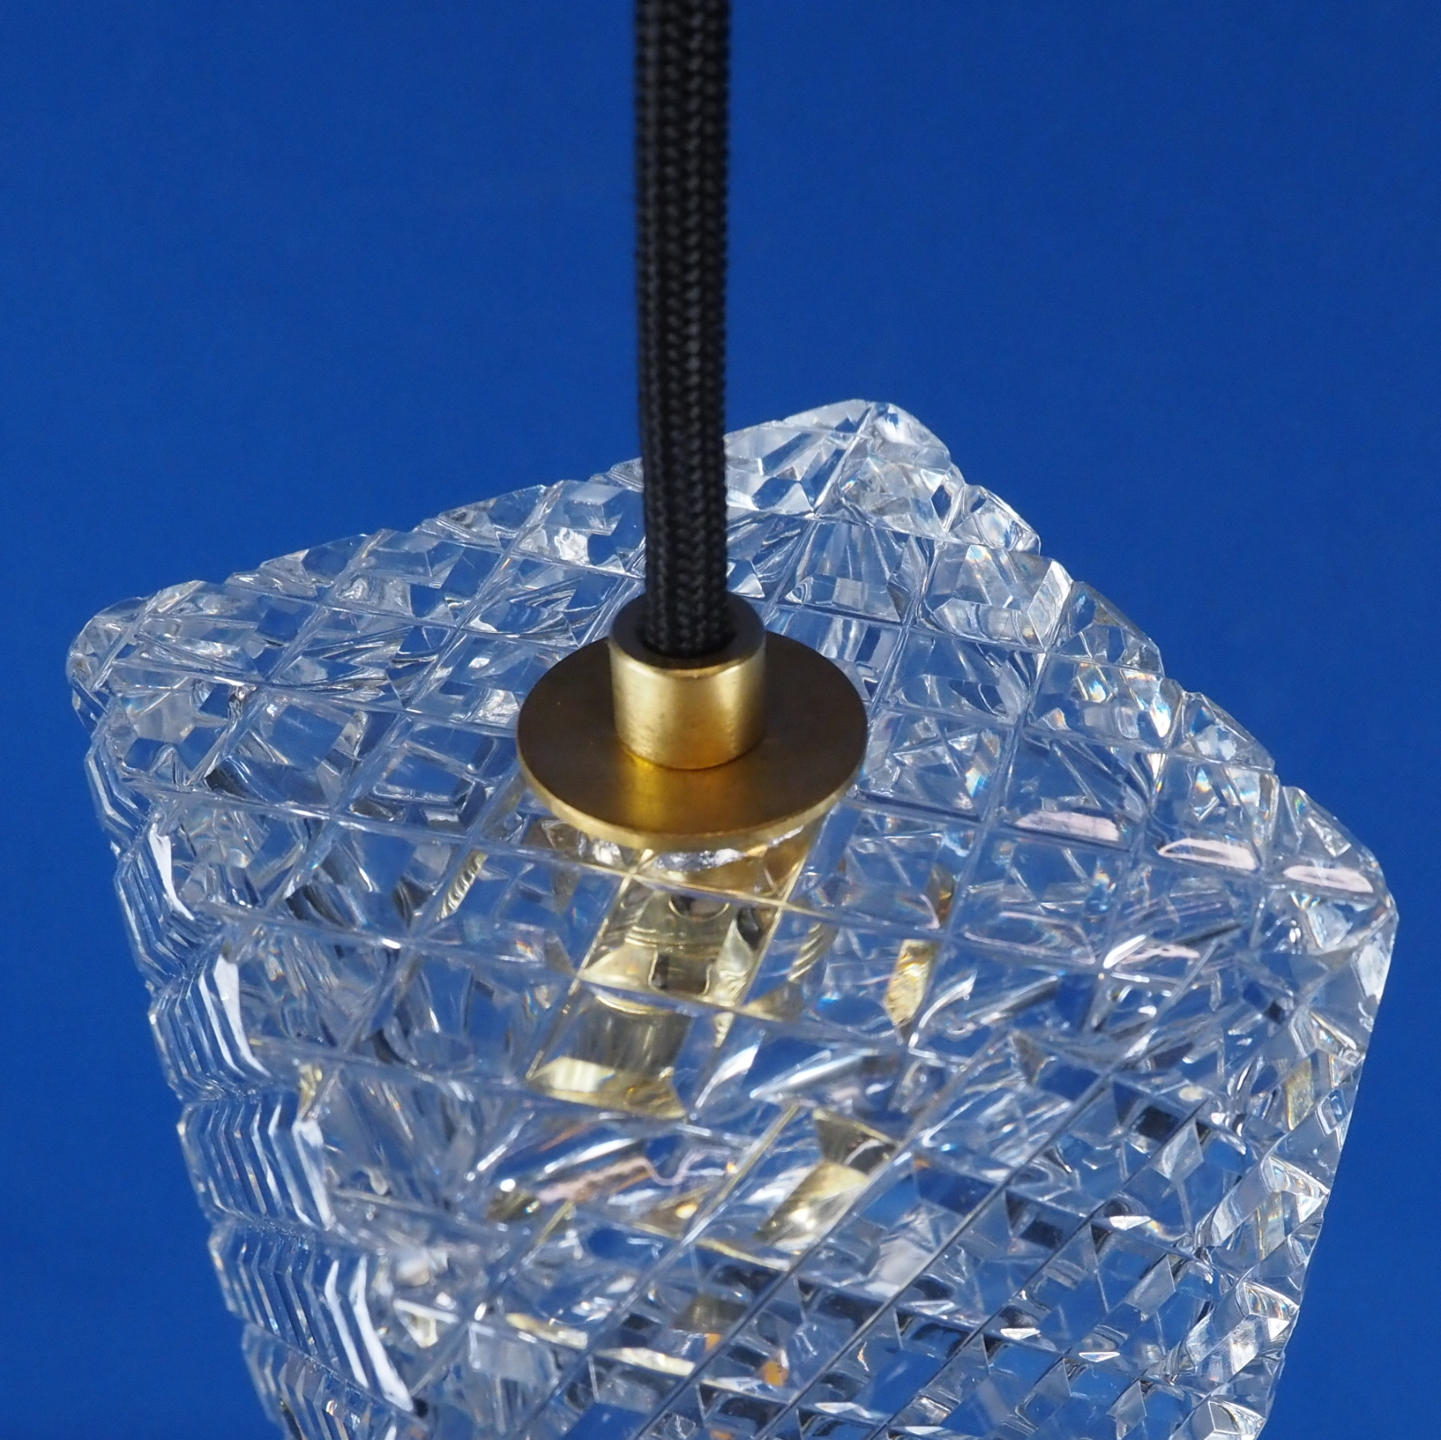 Hanging light 'Gatsby' with handcrafted textured glass diffuser